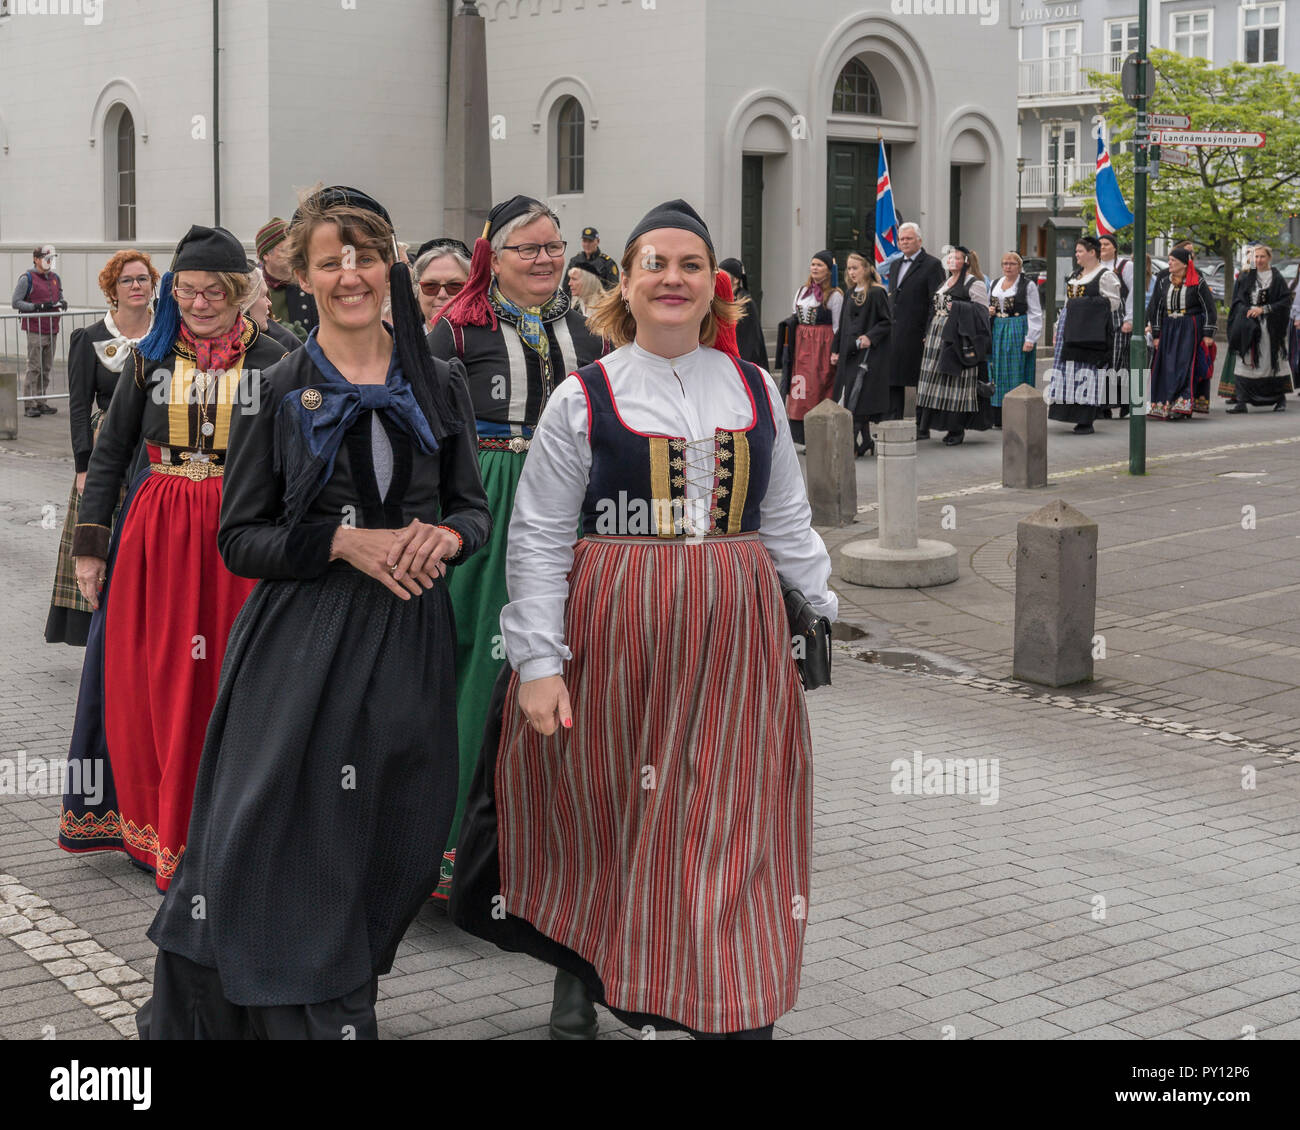 Women dressed in Iceland's national costume, independence day, June 17th, Reykjavik, Iceland. Stock Photo